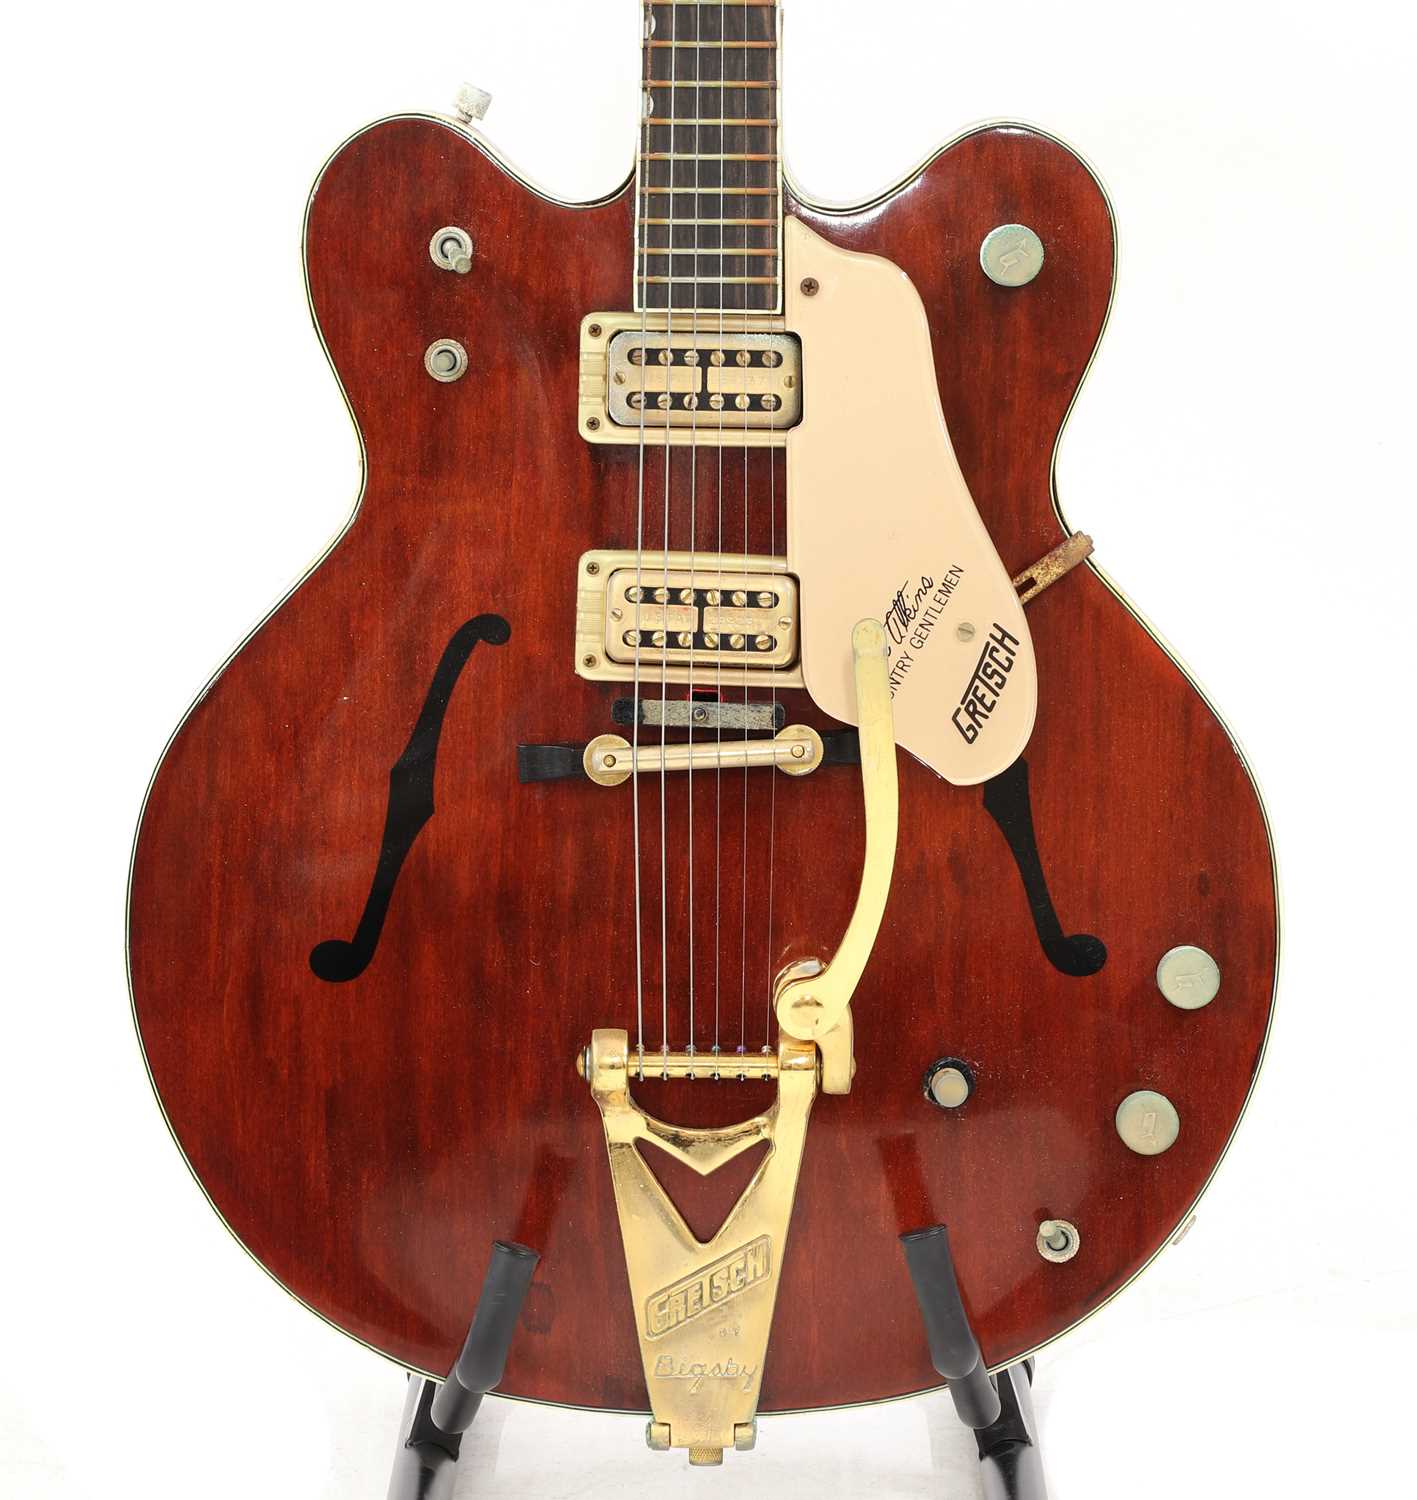 A 1966 Gretsch Chet Atkins Country Gentleman electric guitar, - Image 3 of 4